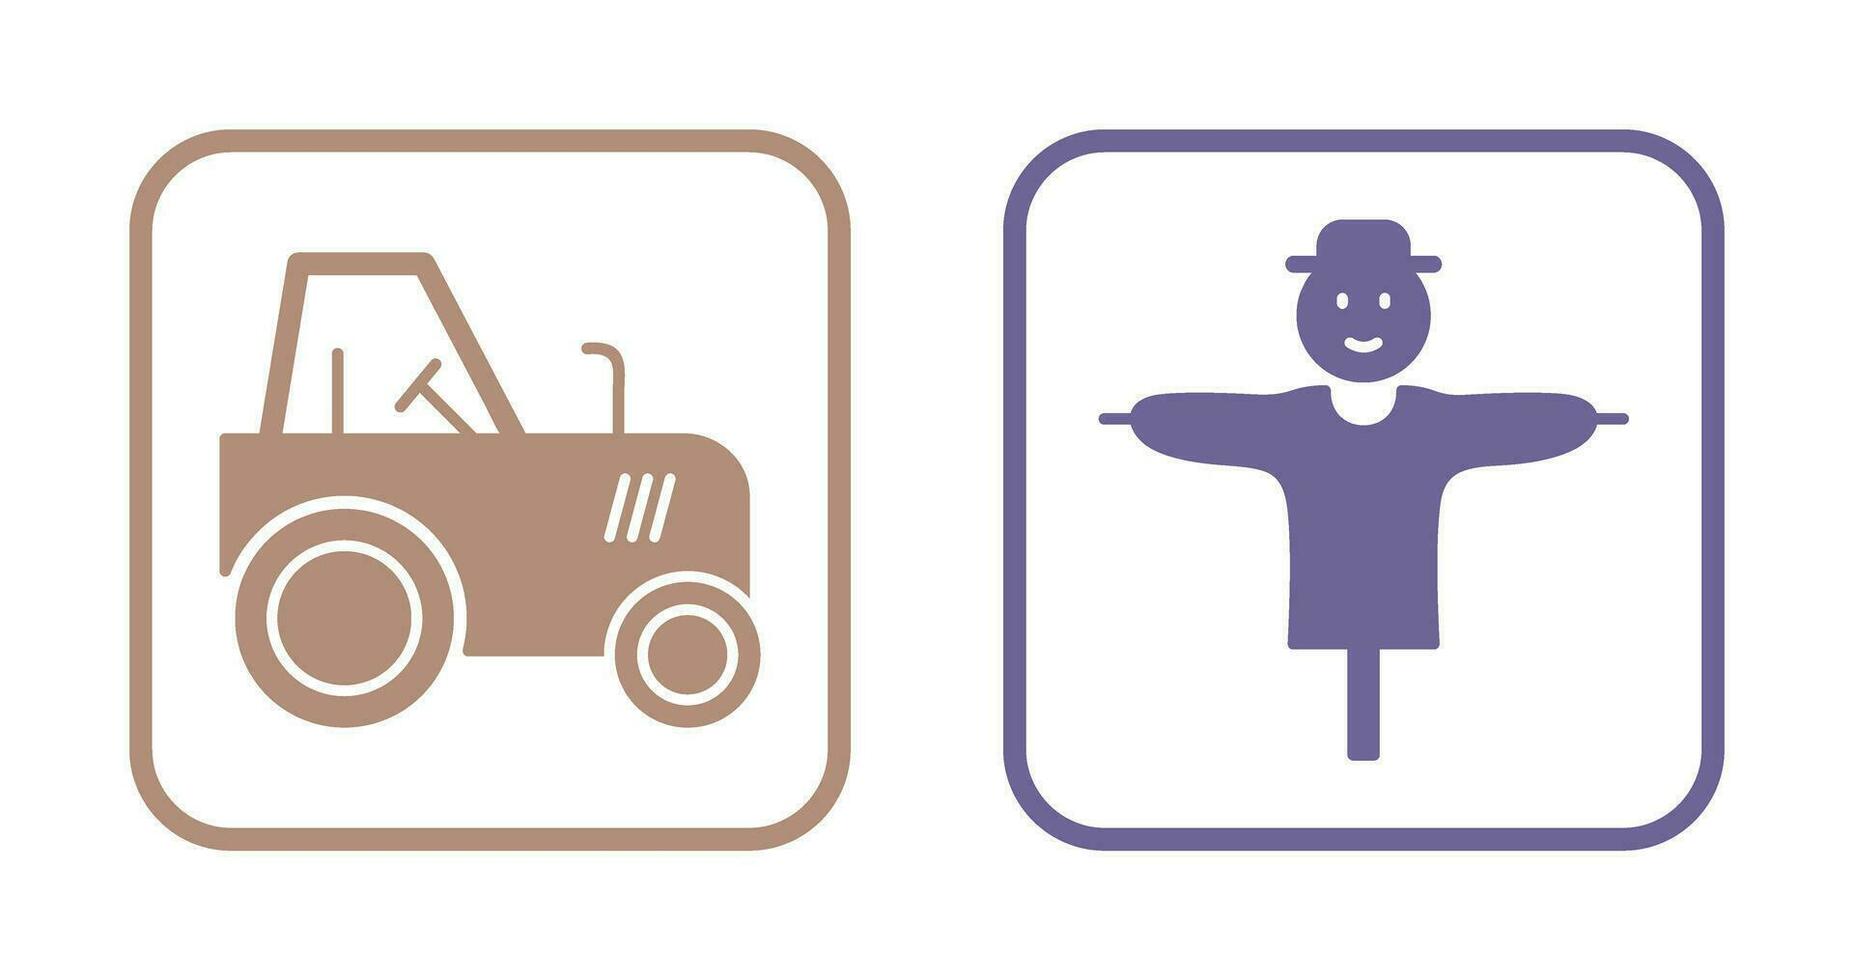 Tractor and Farming Icon vector